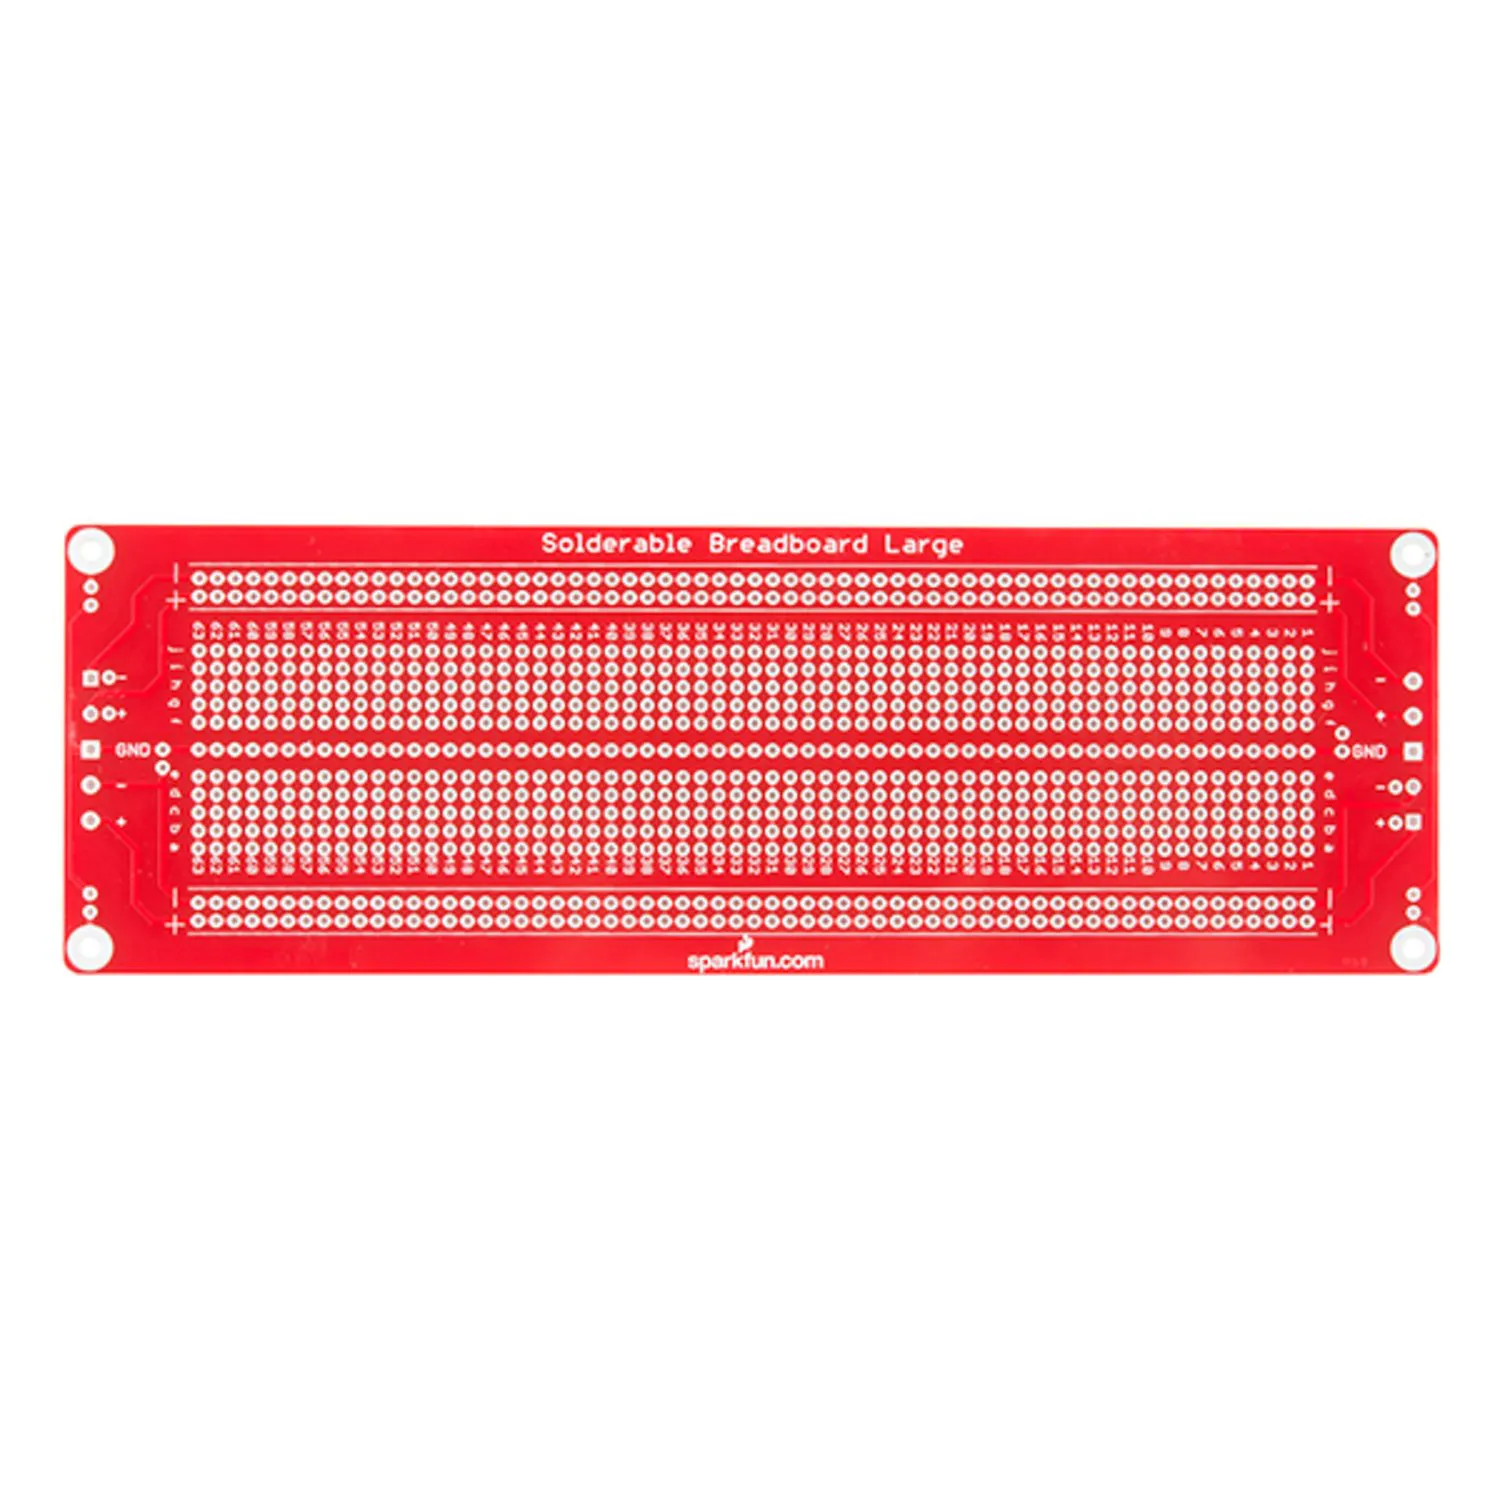 Photo of SparkFun Solder-able Breadboard - Large